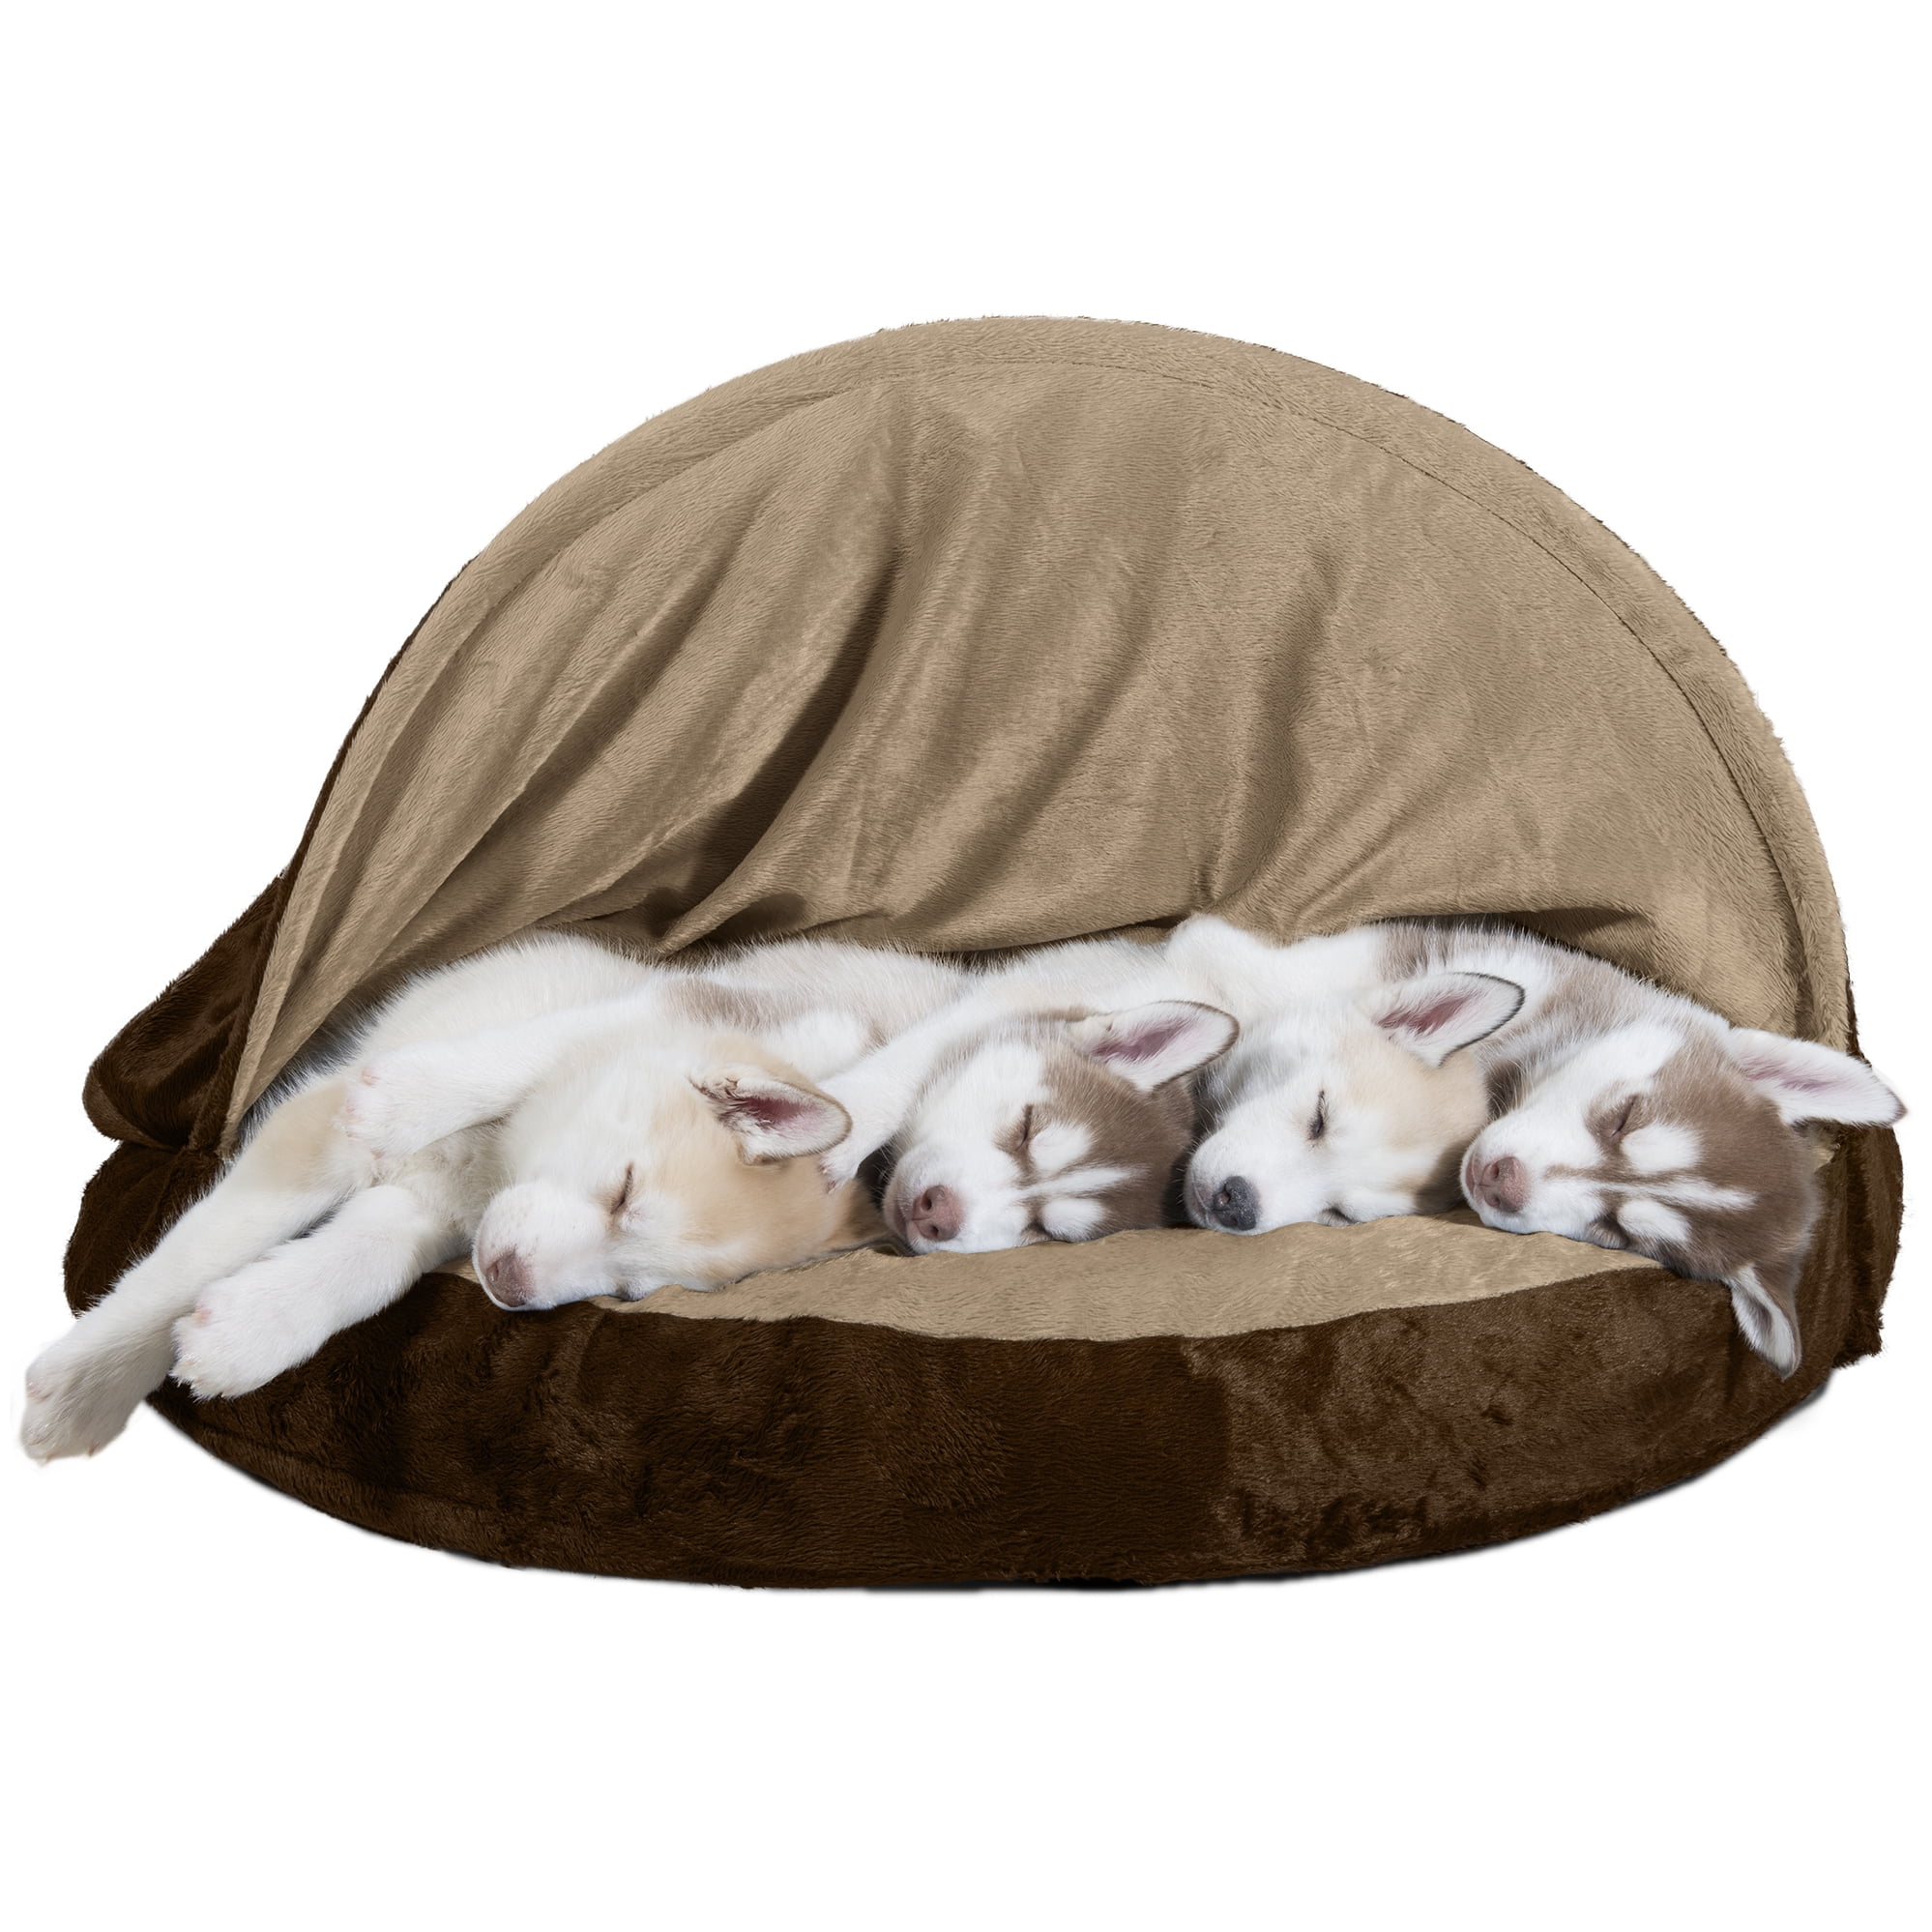 FurHaven Pet Dog Bed 35-Inch Espresso Memory Foam Round Microvelvet Snuggery Burrow Pet Bed Dogs & Cats